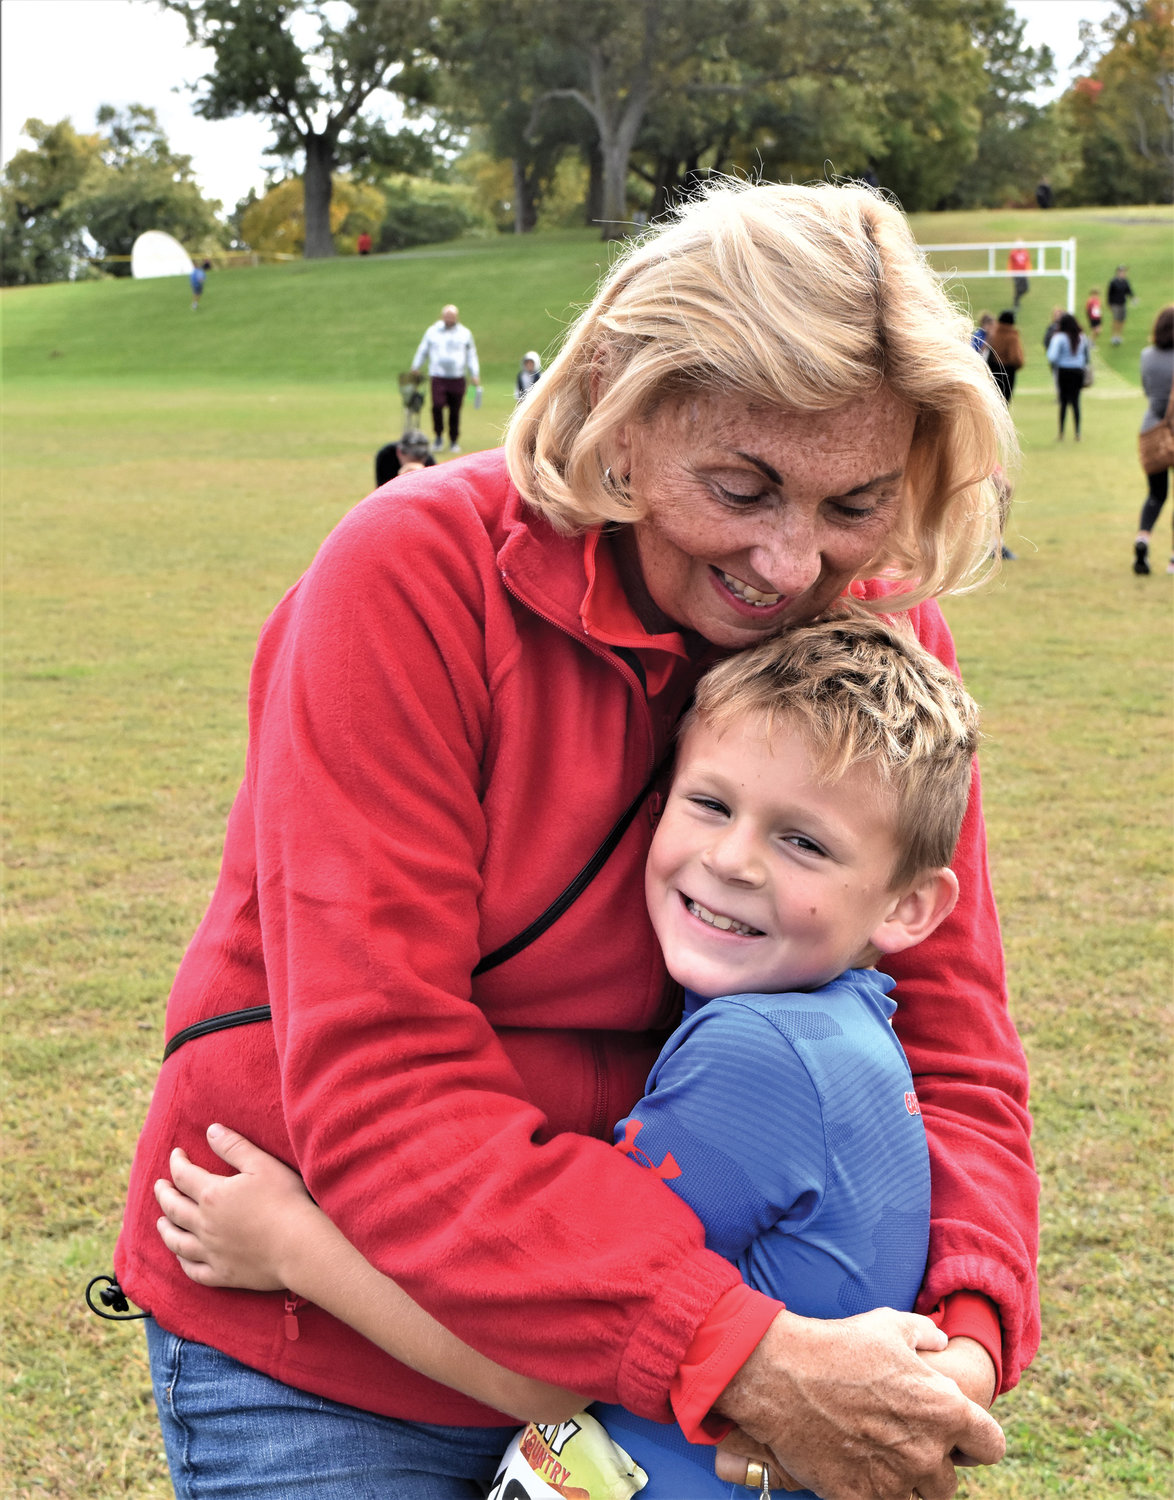 Declan O’Keefe, 9, receives a hug from his grandmother, Mary O’Keefe, after winning the CYO cross-country race for boys in grades three through five at St. Joseph’s Seminary, Dunwoodie, Oct. 8.